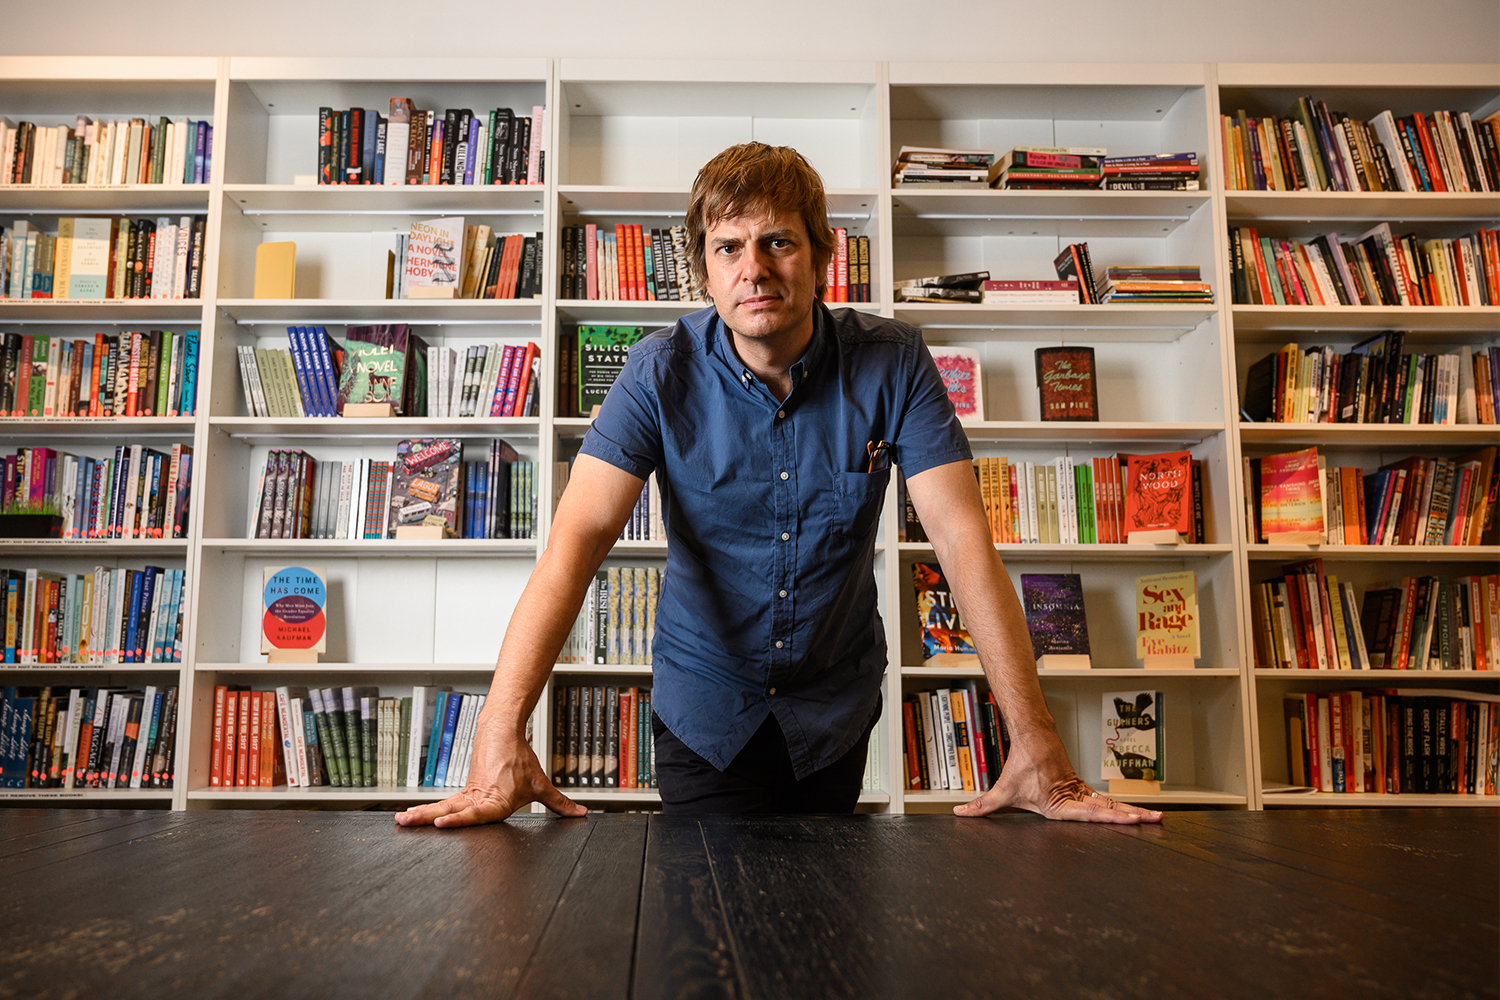 Andy Hunter, CEO of online bookstore Bookshop